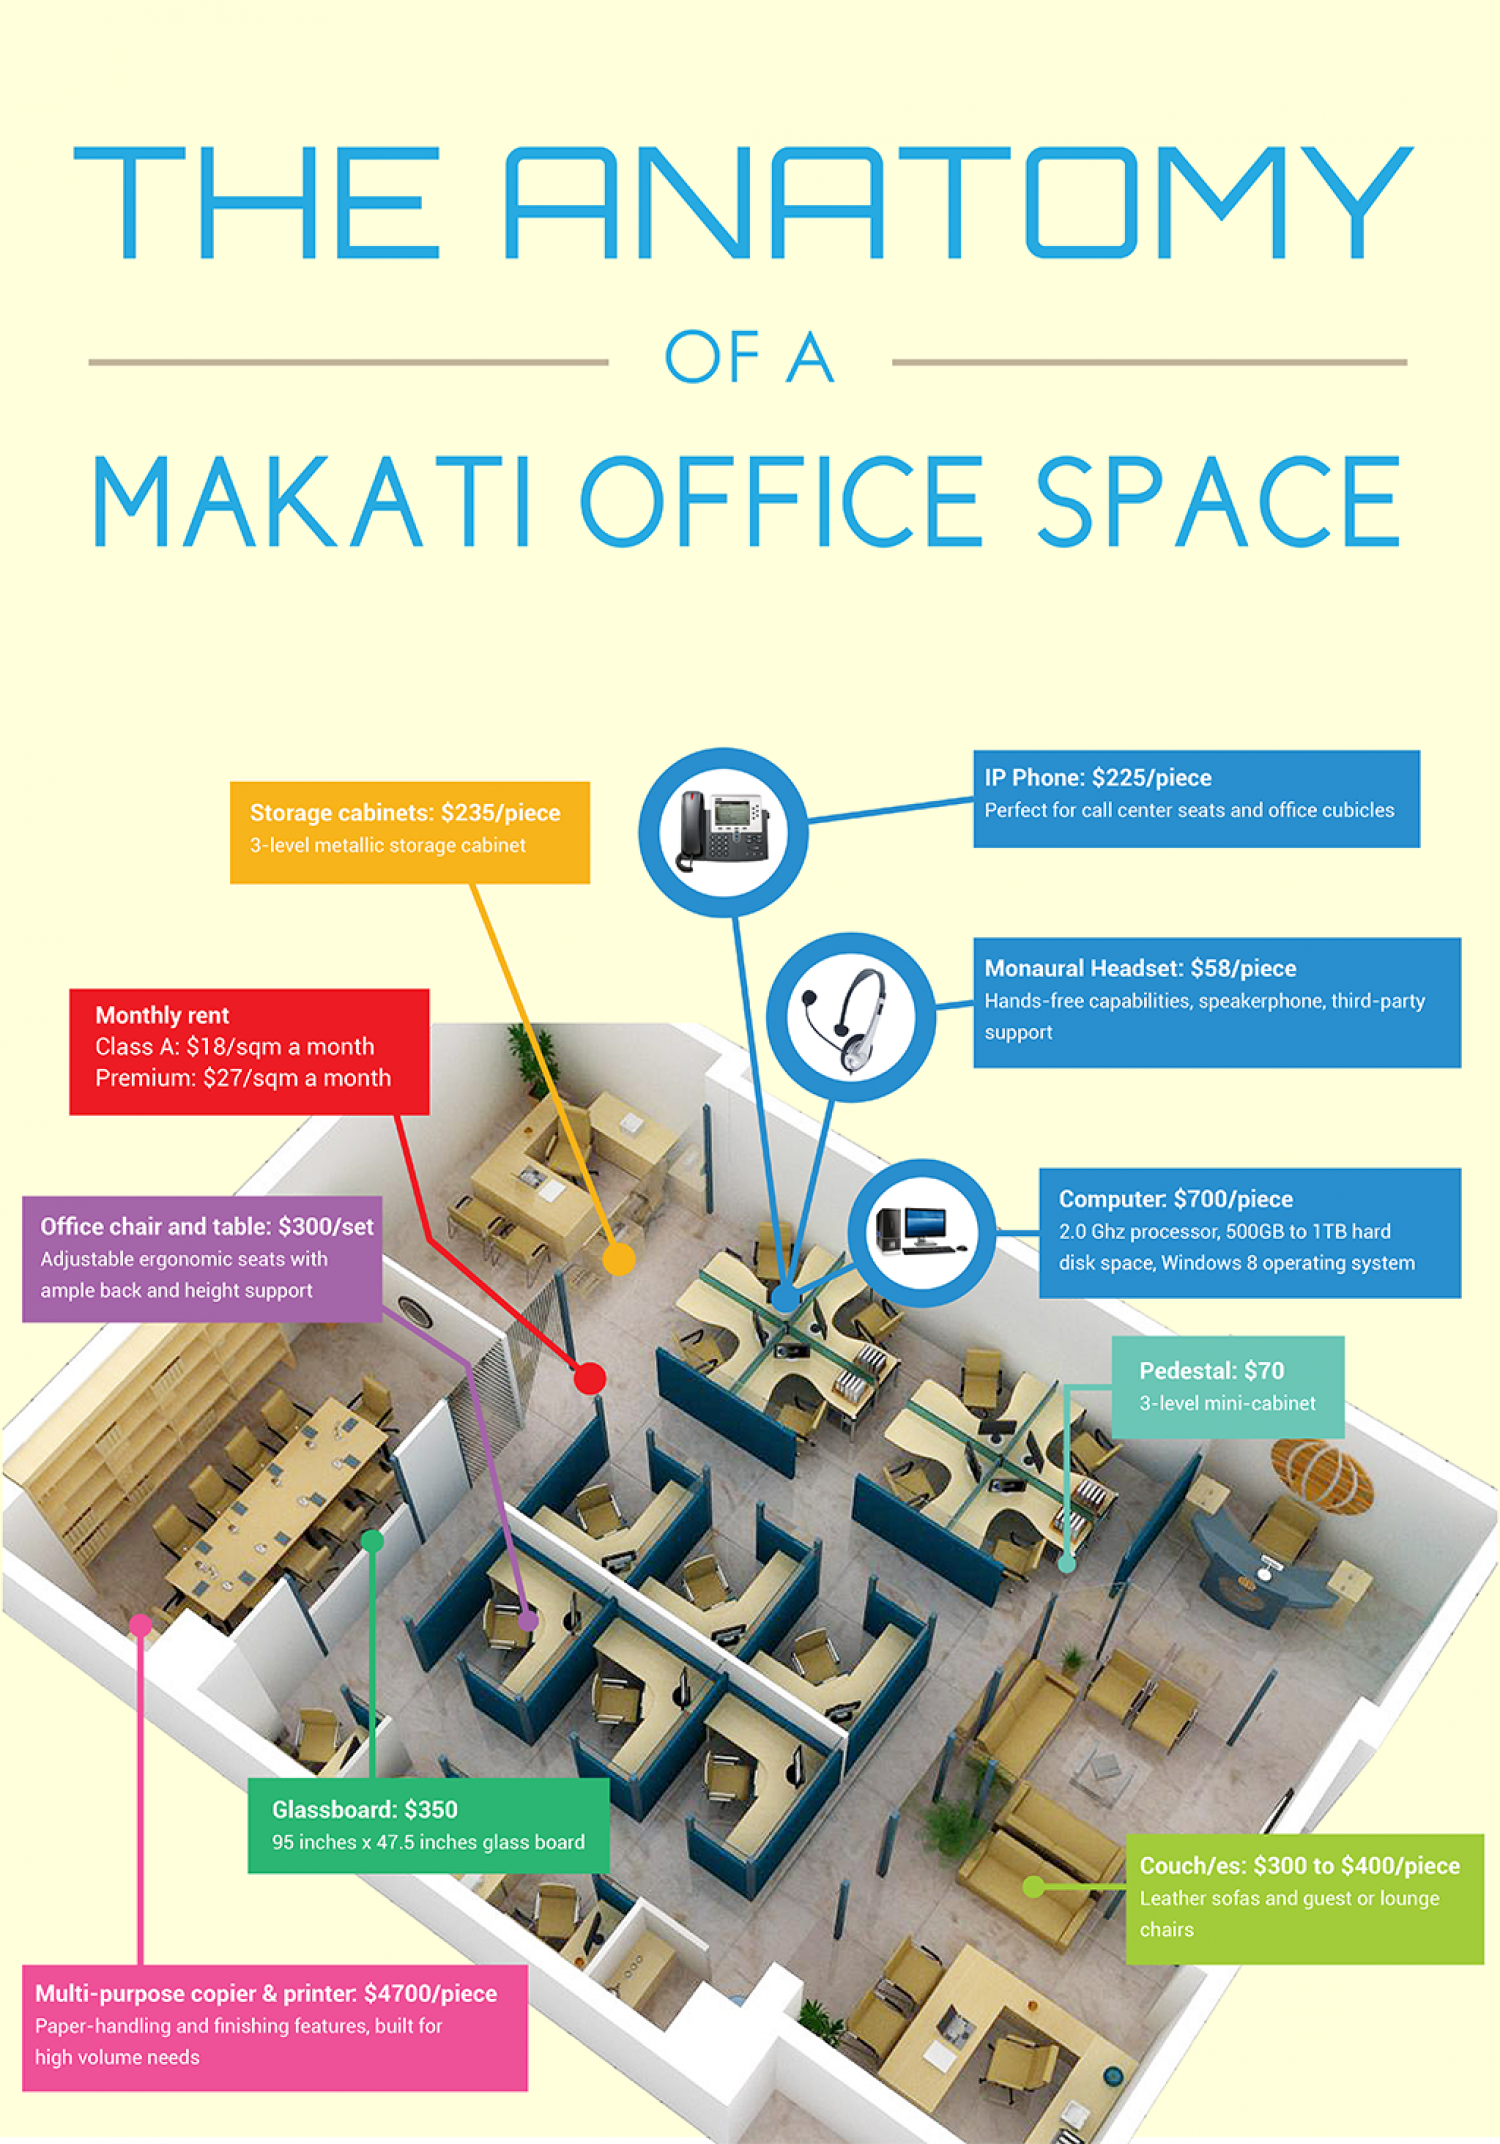 The Anatomy of a Makati Office Space Infographic